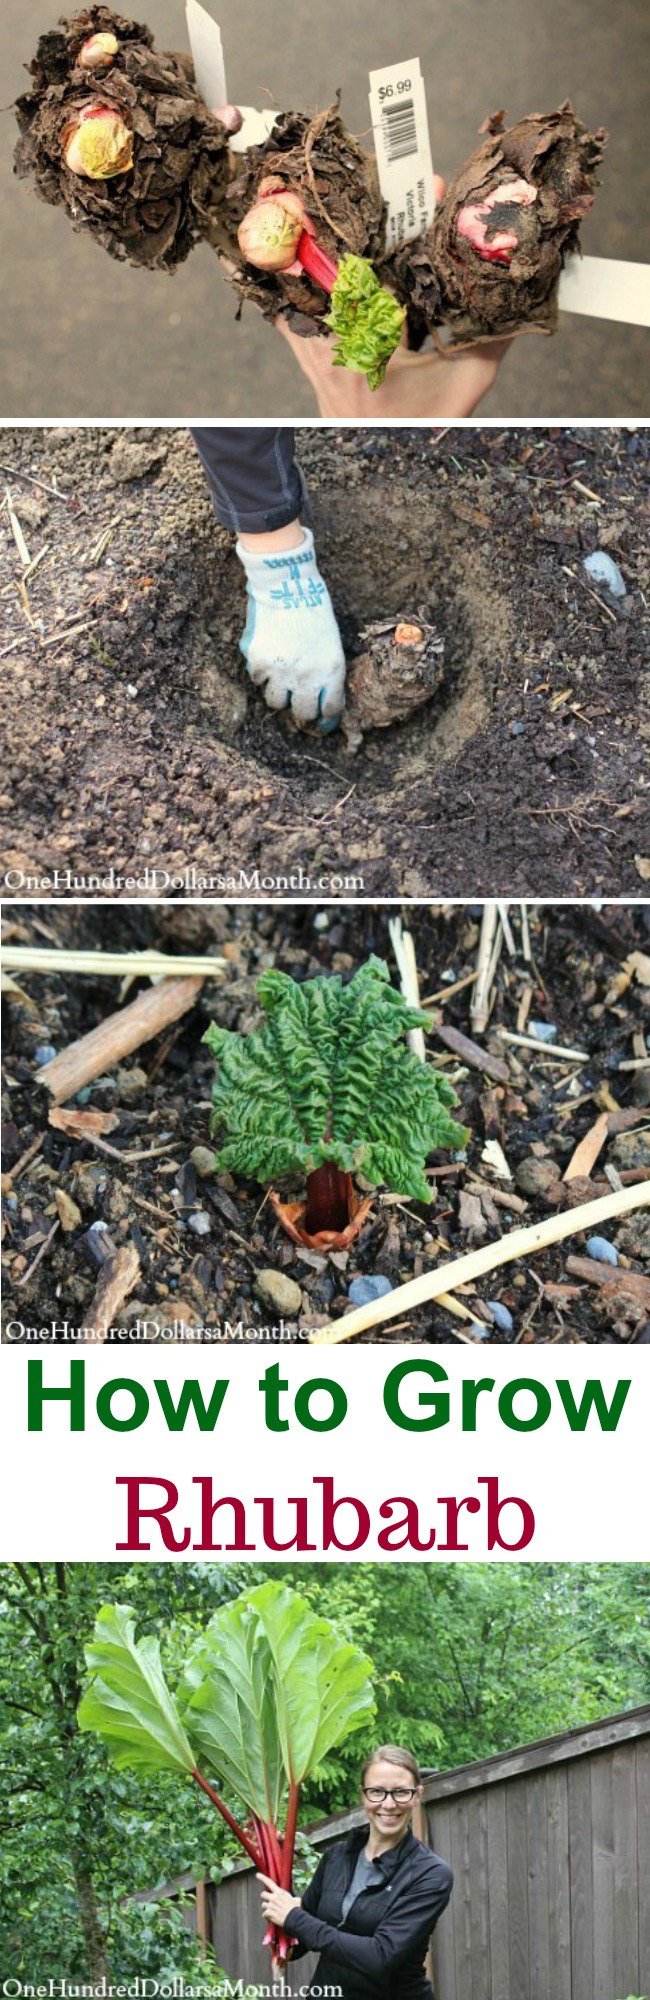 How to Grow Rhubarb {Start to Finish}